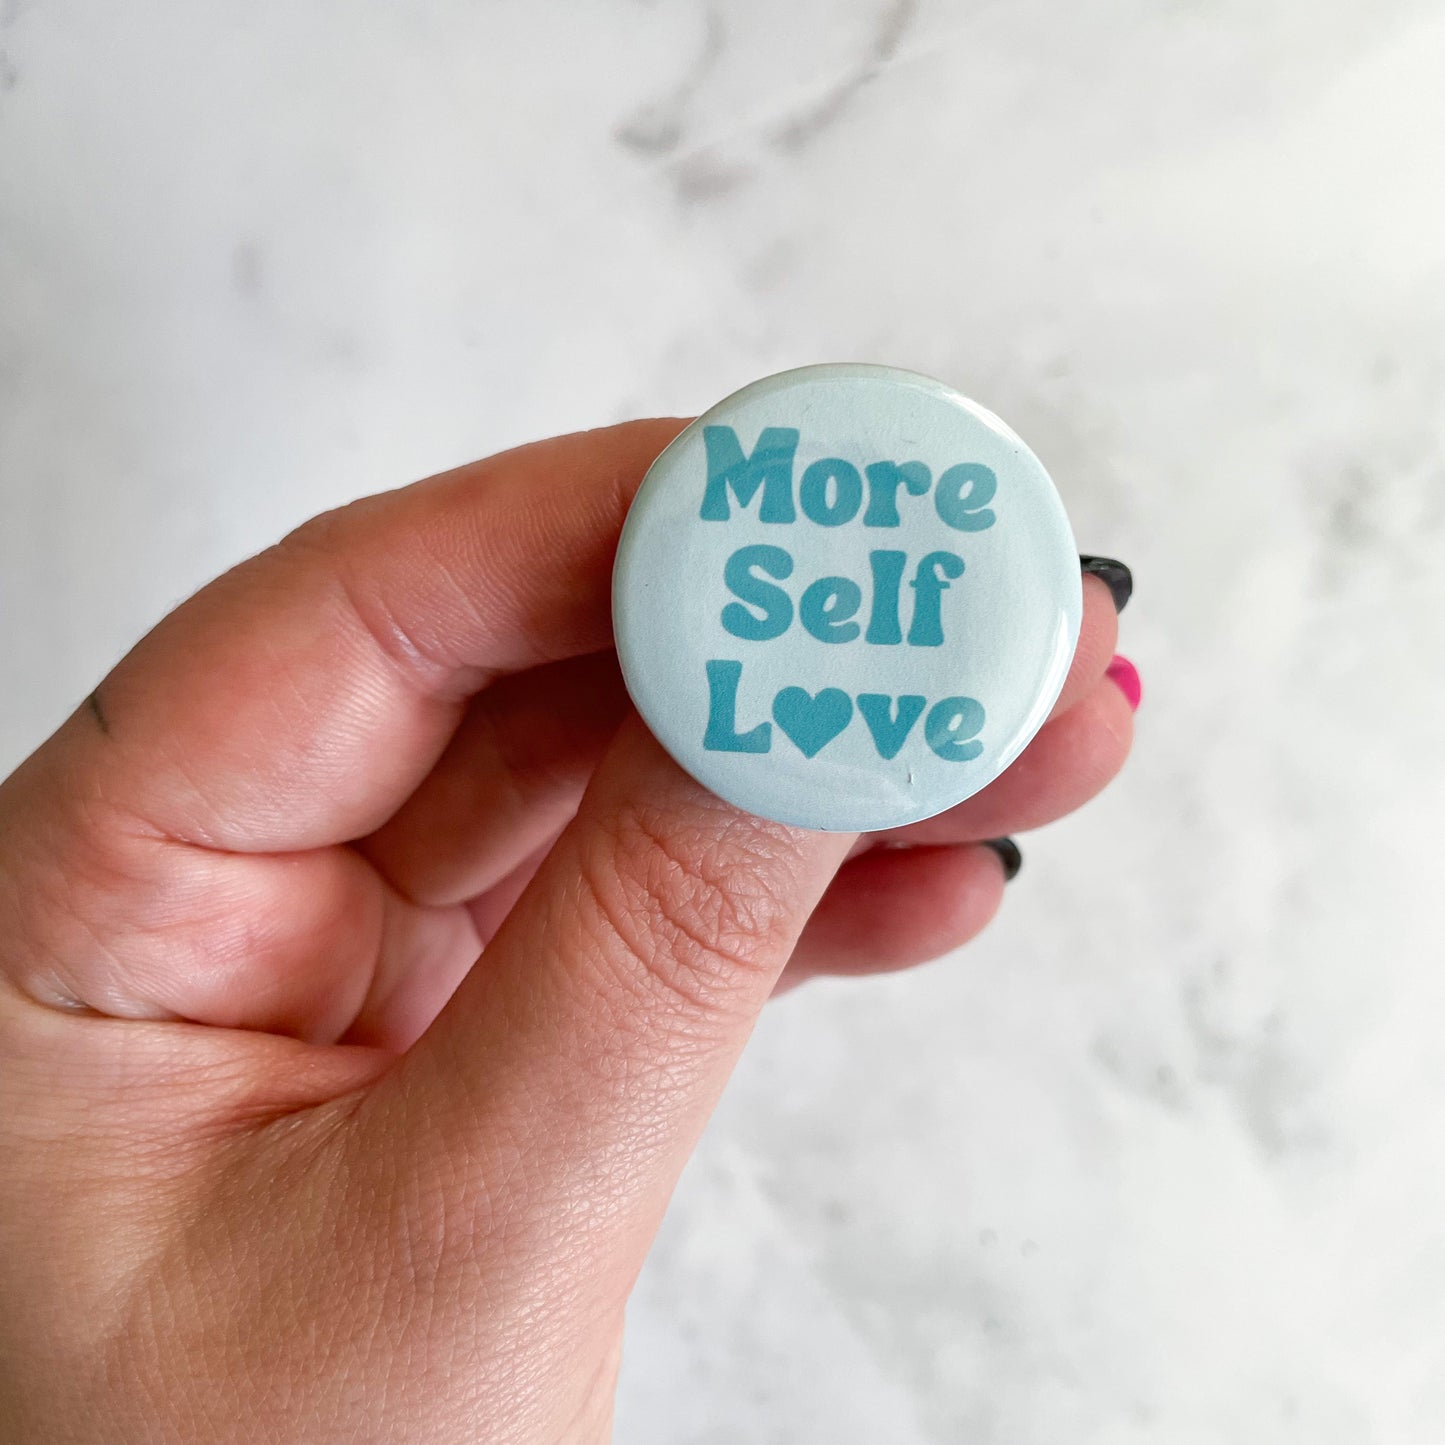 More Self Love (Turquoise) Button / Badge (Buy 4 Get 1 FREE)